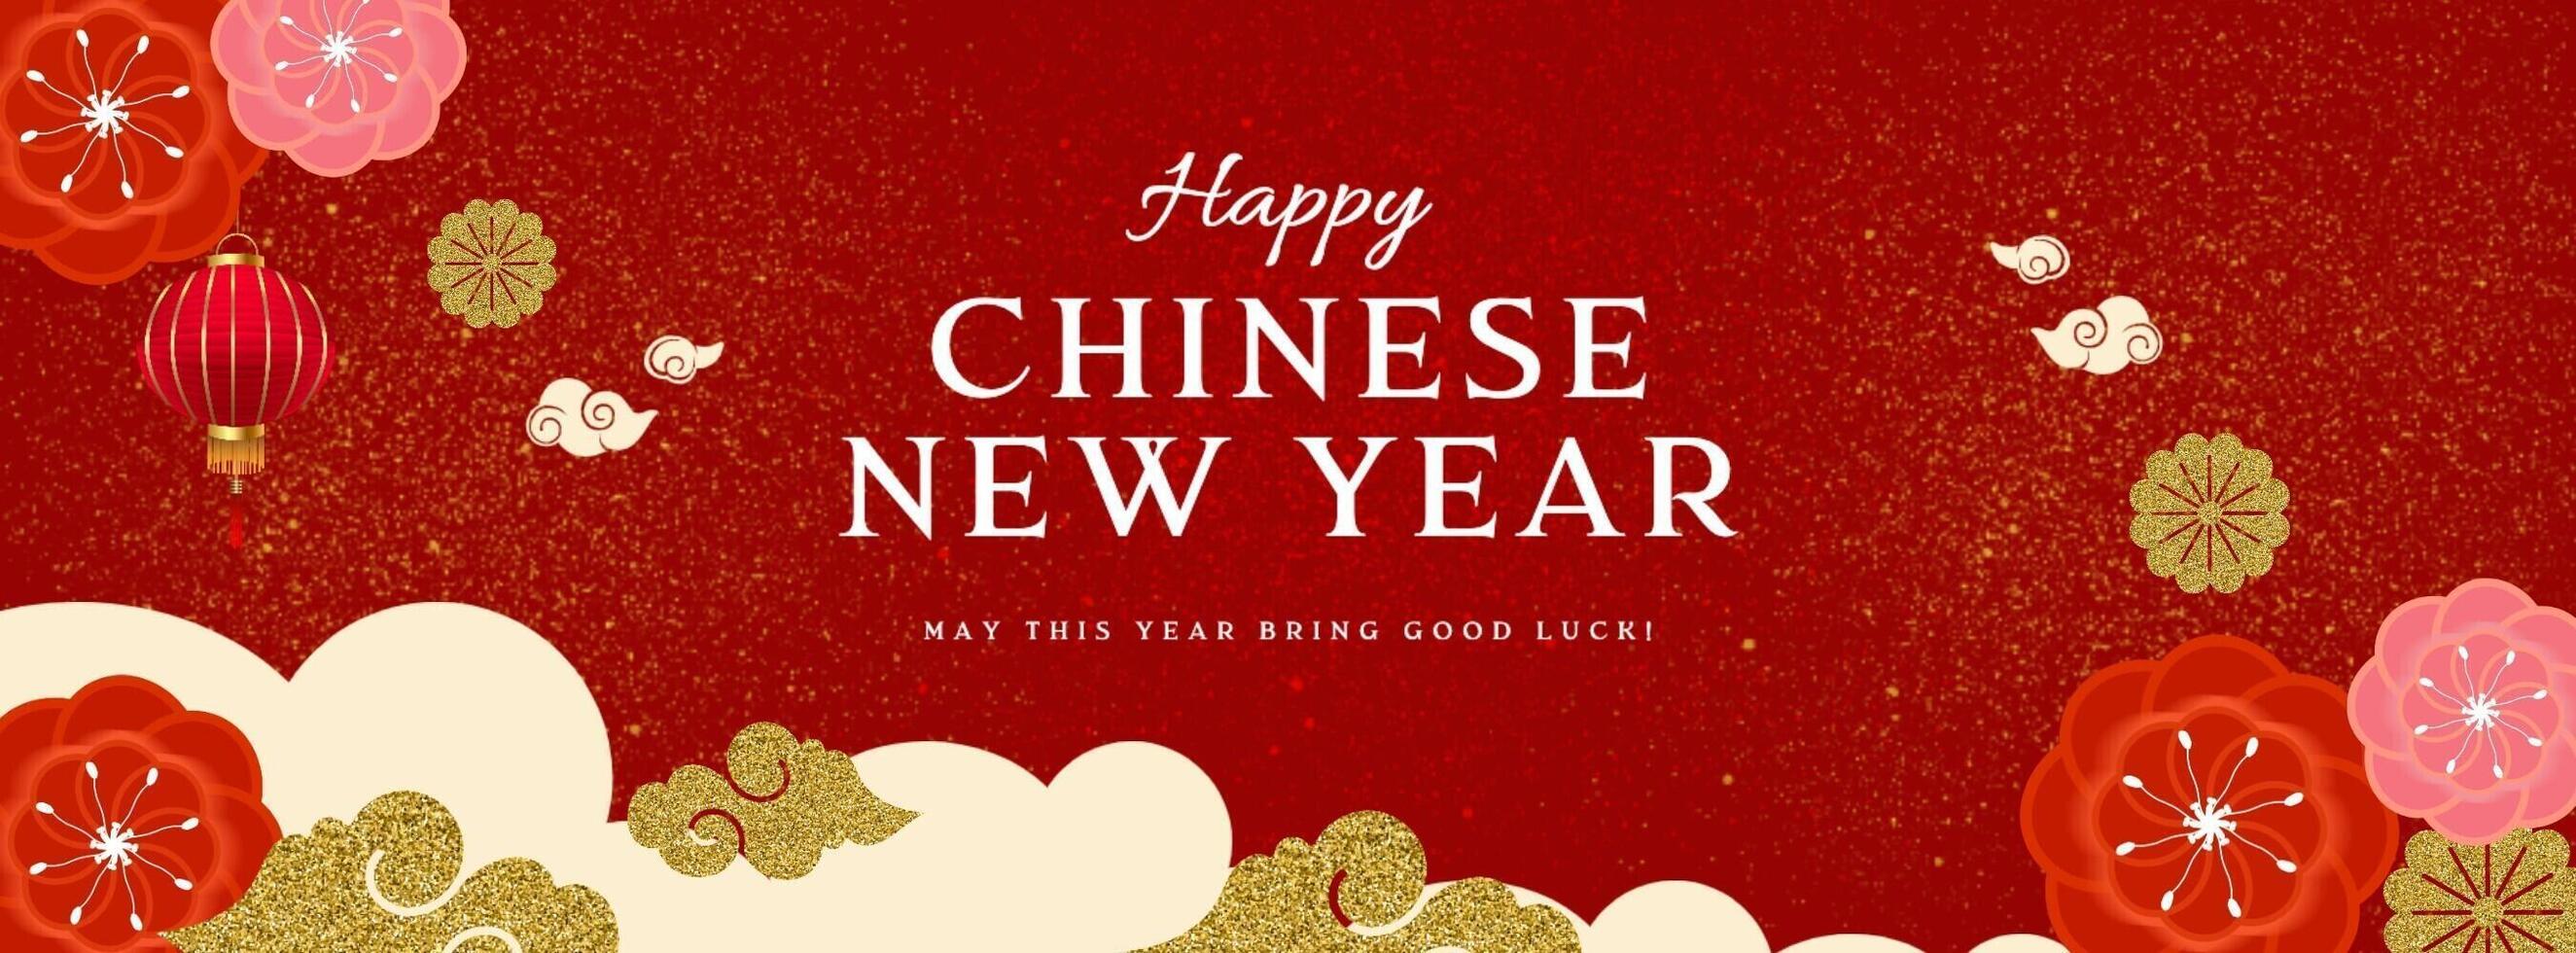 social media banner for chinese new year template